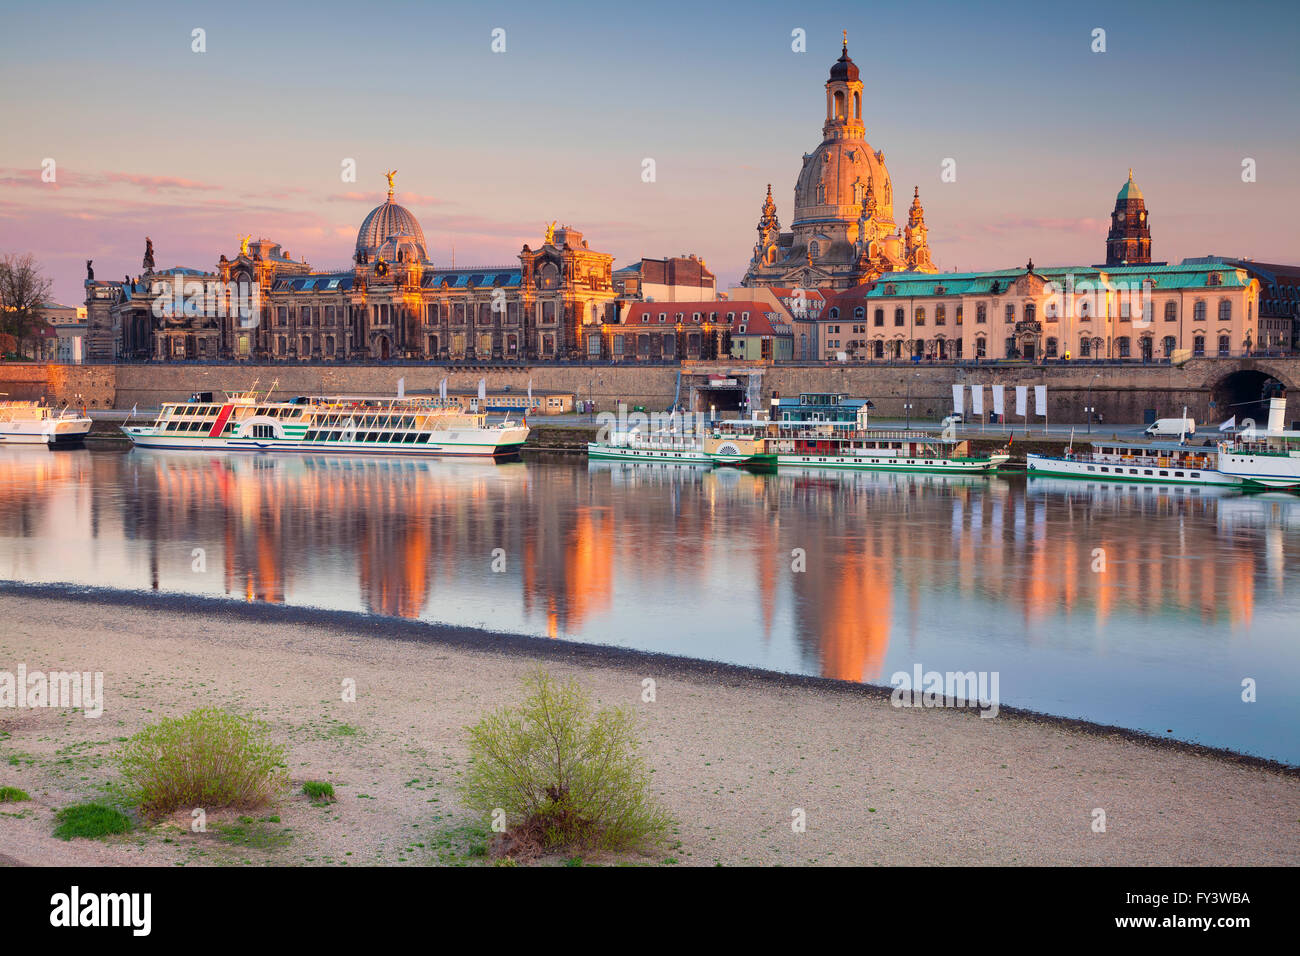 Dresden. Image of Dresden, Germany during sunset with Elbe River in the foreground. Stock Photo